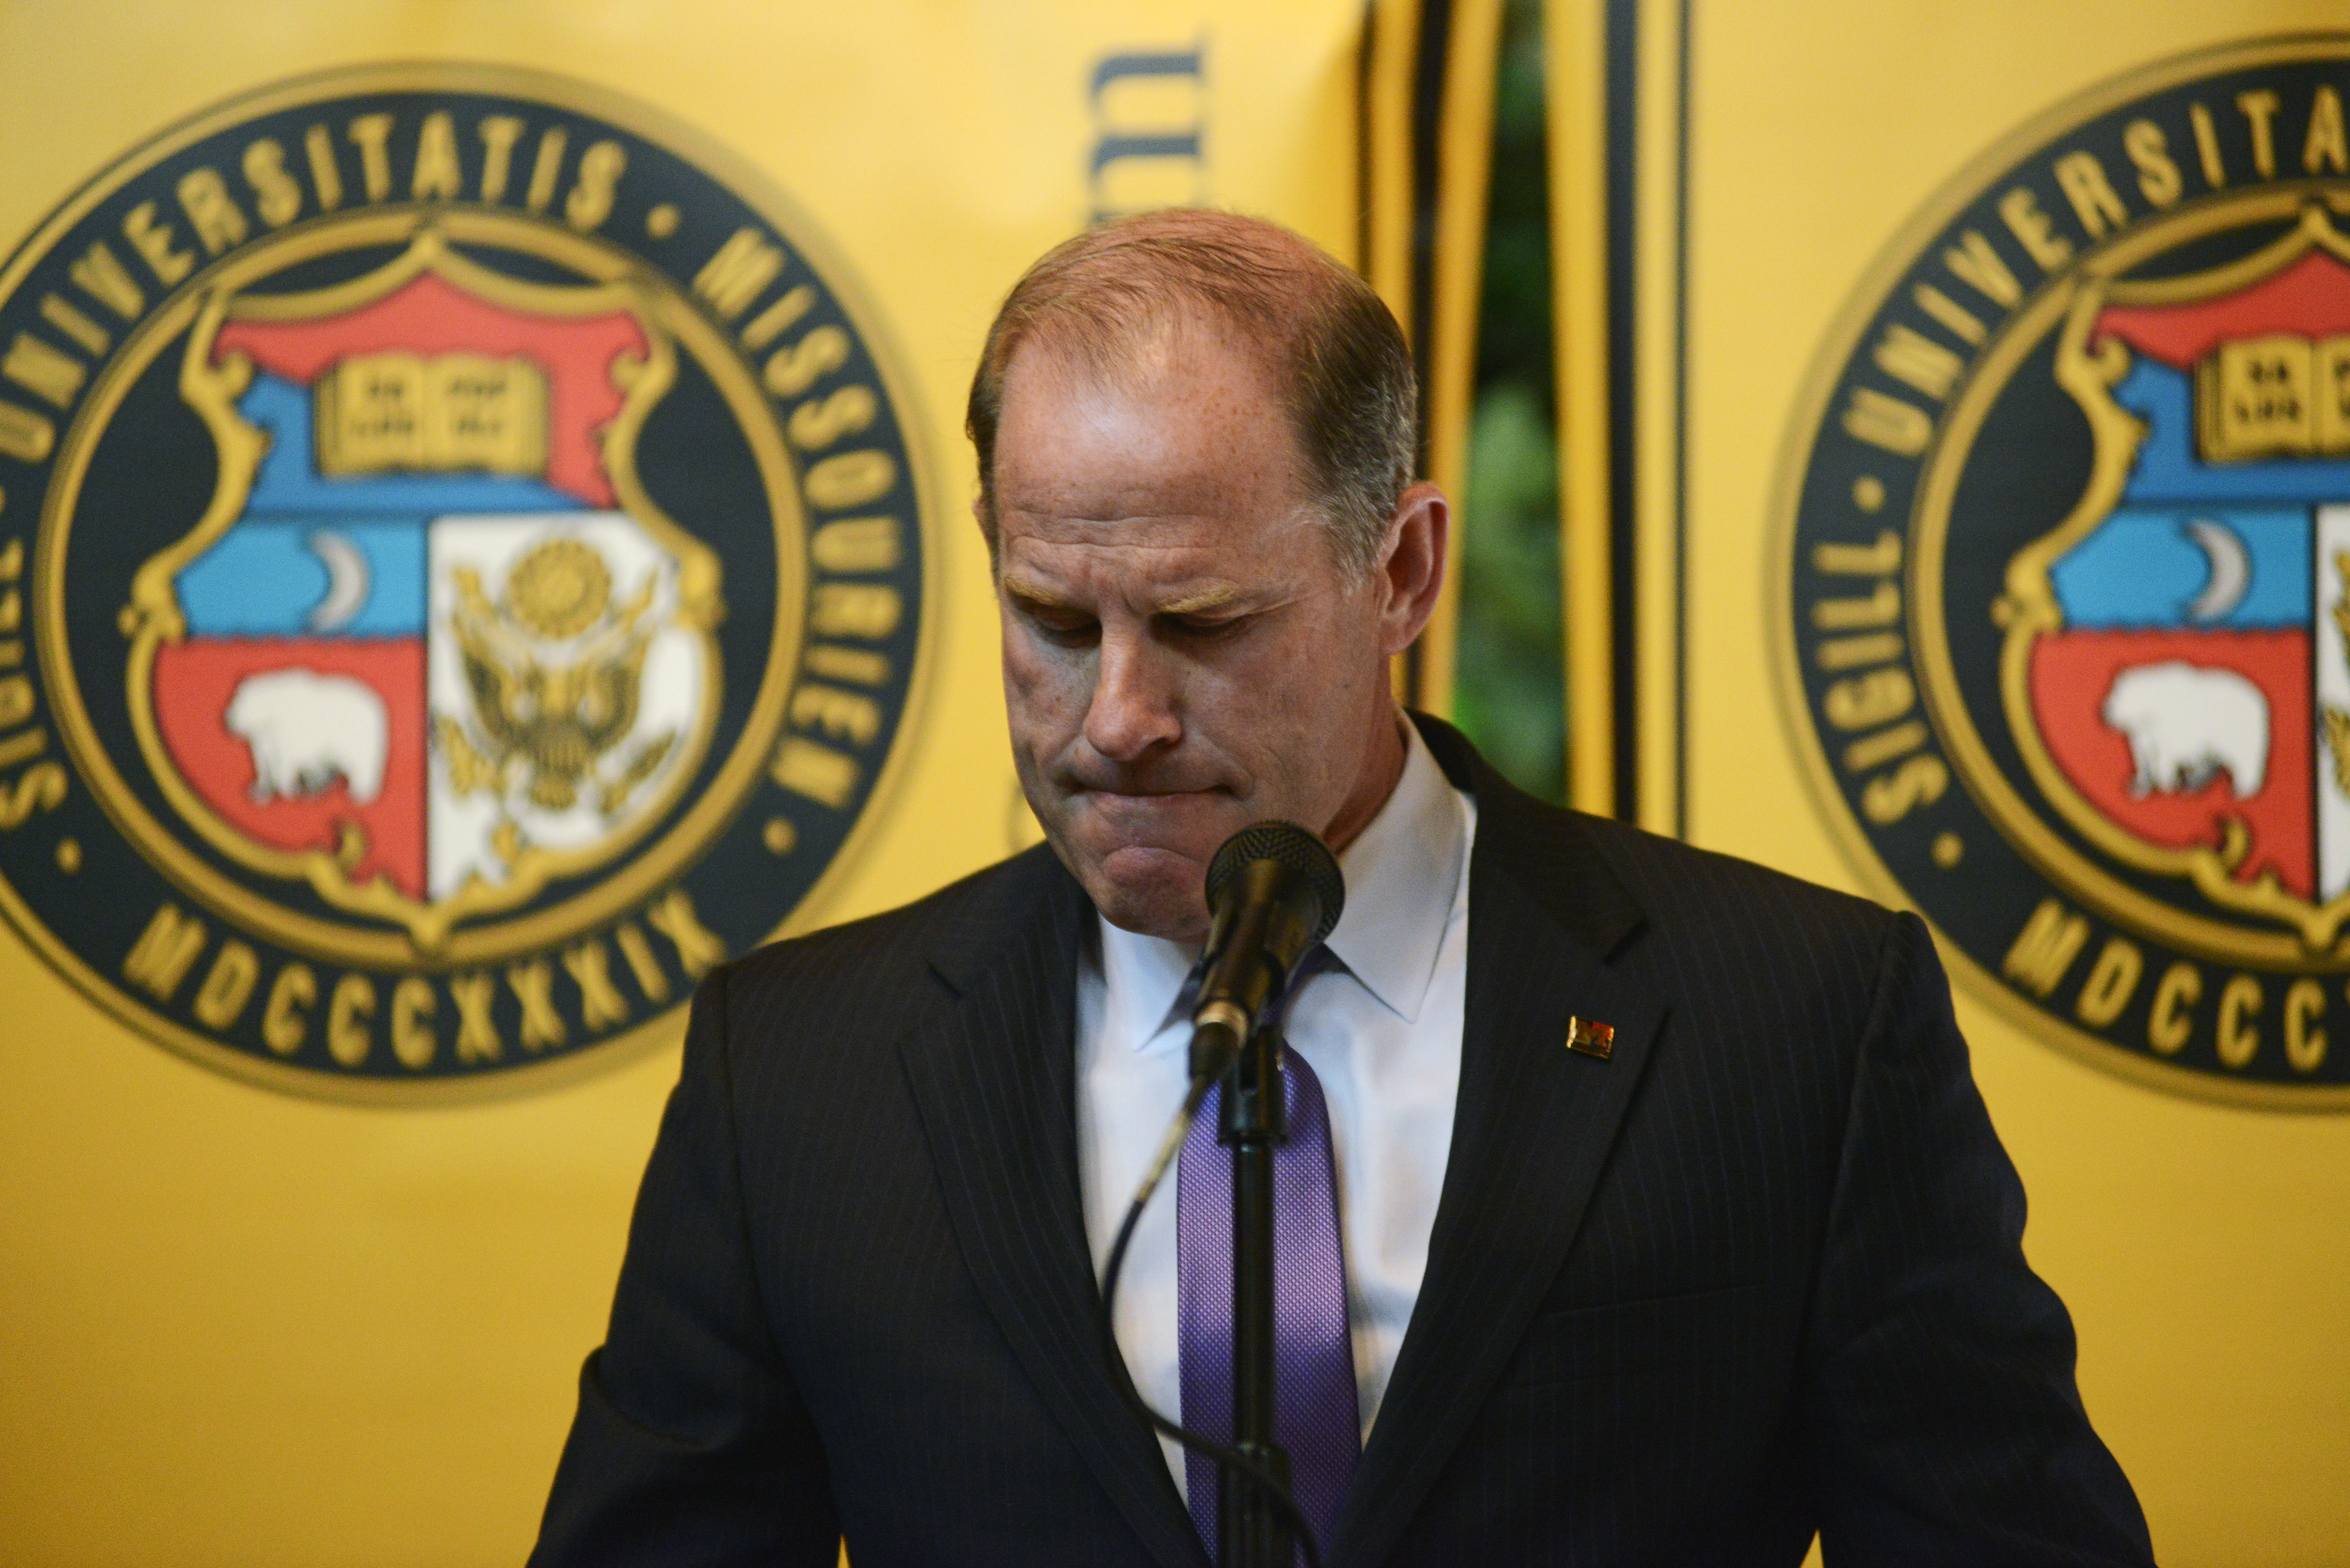 University of Missouri President Tim Wolfe announces his resignation at the Old Alumni Center on Nov. 9, 2015. The resignation was preceded by a Saturday announcement from thirty football players who said they were boycotting football-related activities until Wolfe was removed from his post.